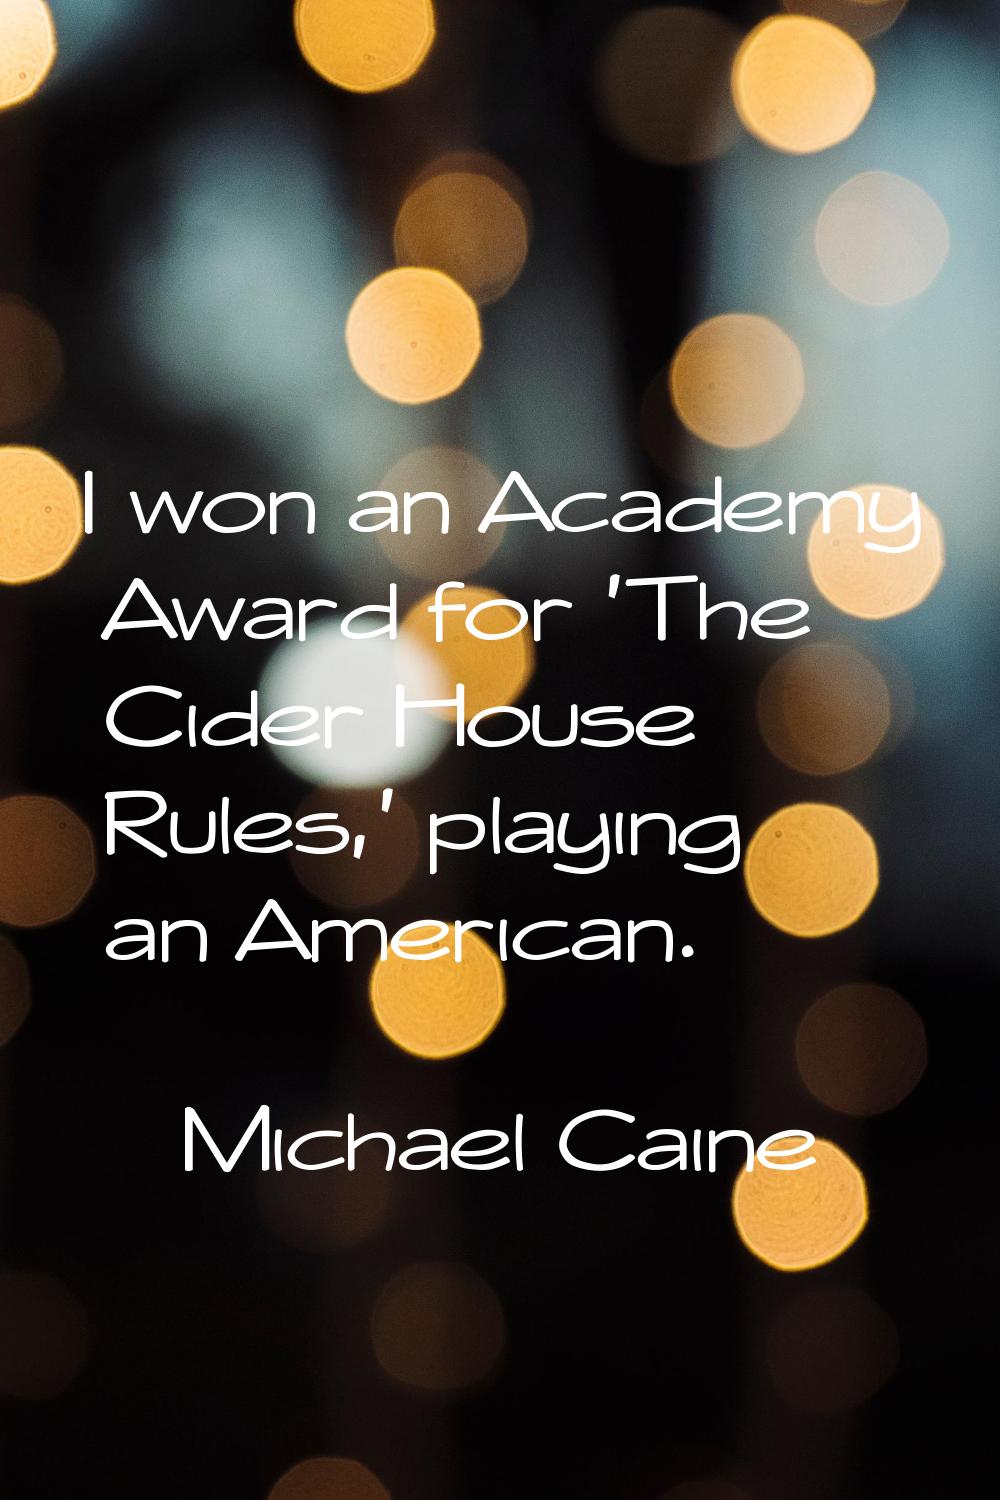 I won an Academy Award for 'The Cider House Rules,' playing an American.